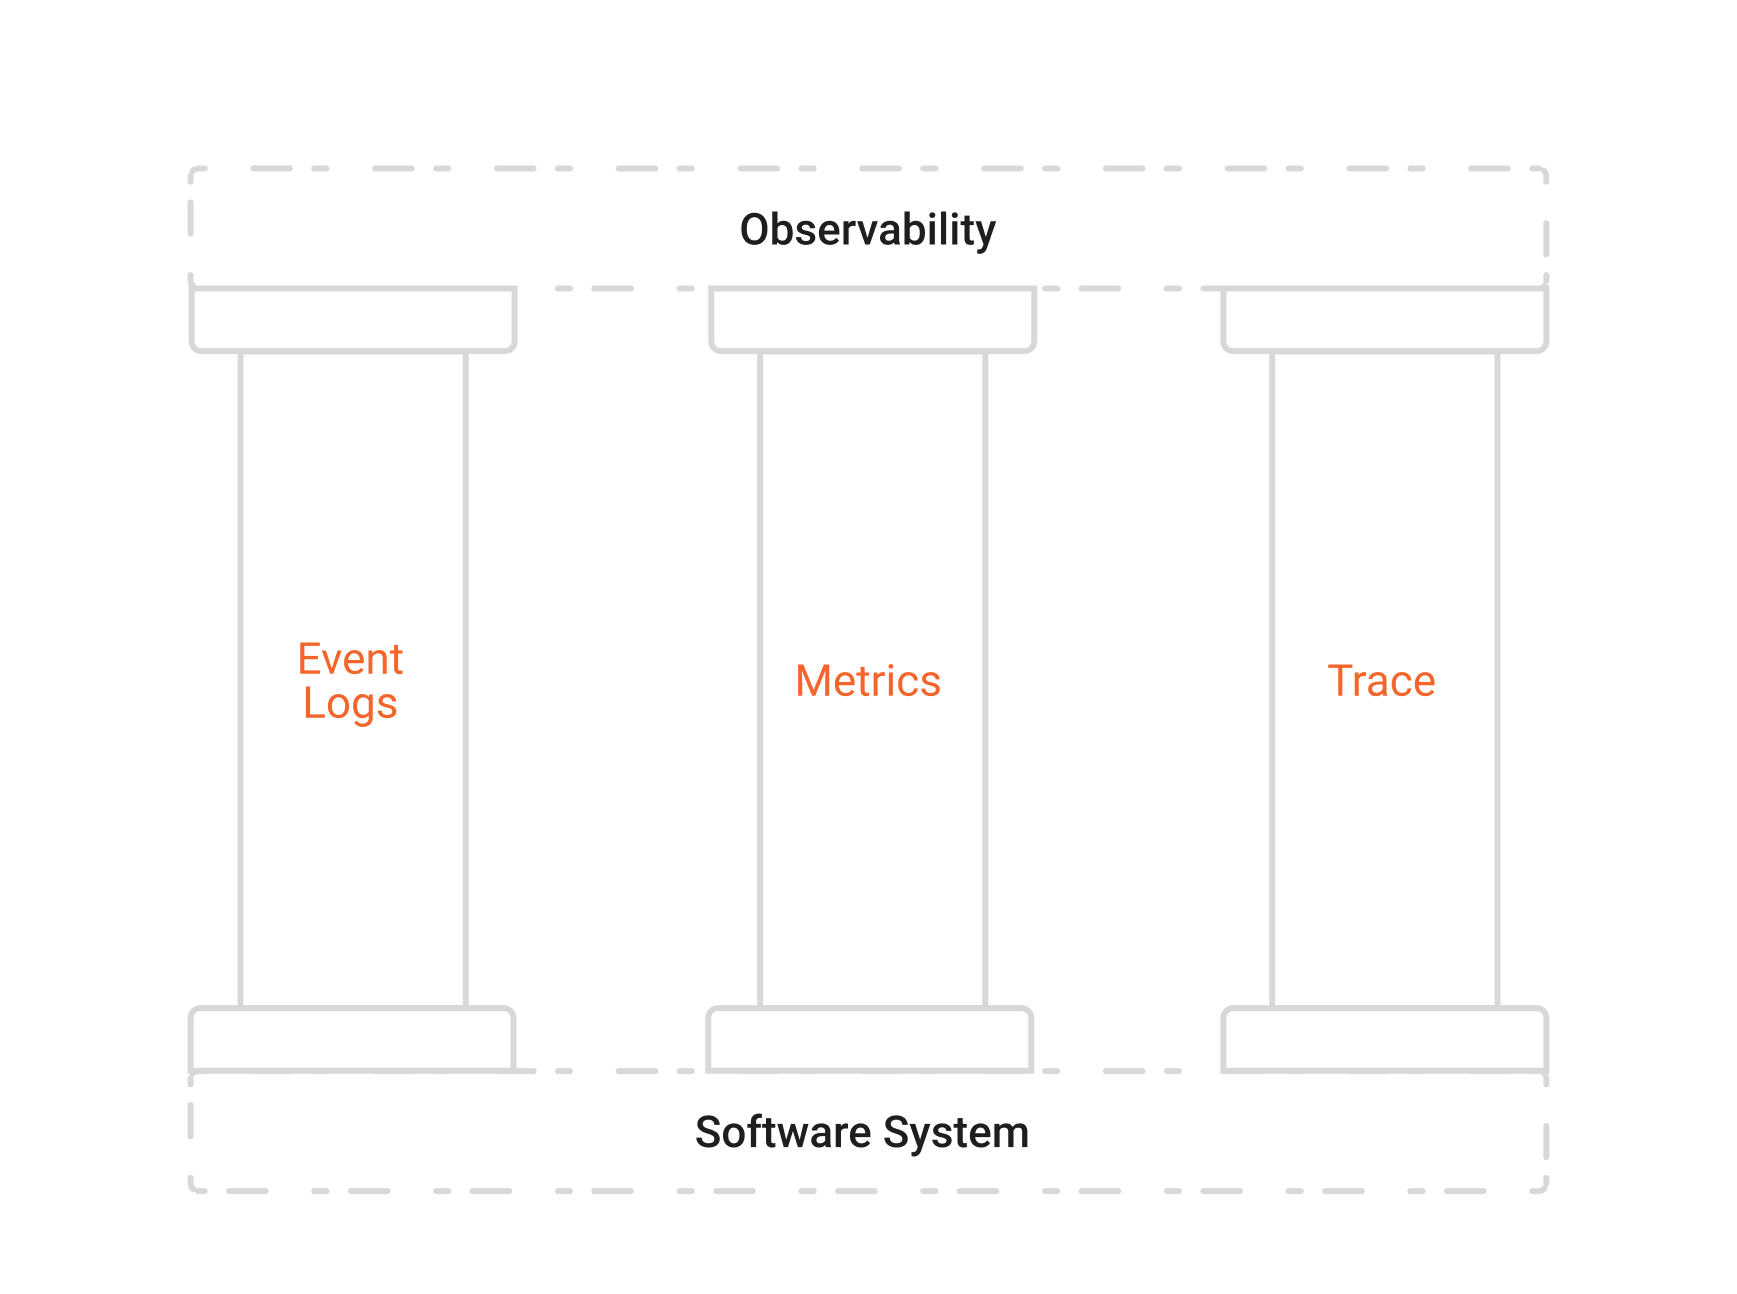 Image with pillars of observability